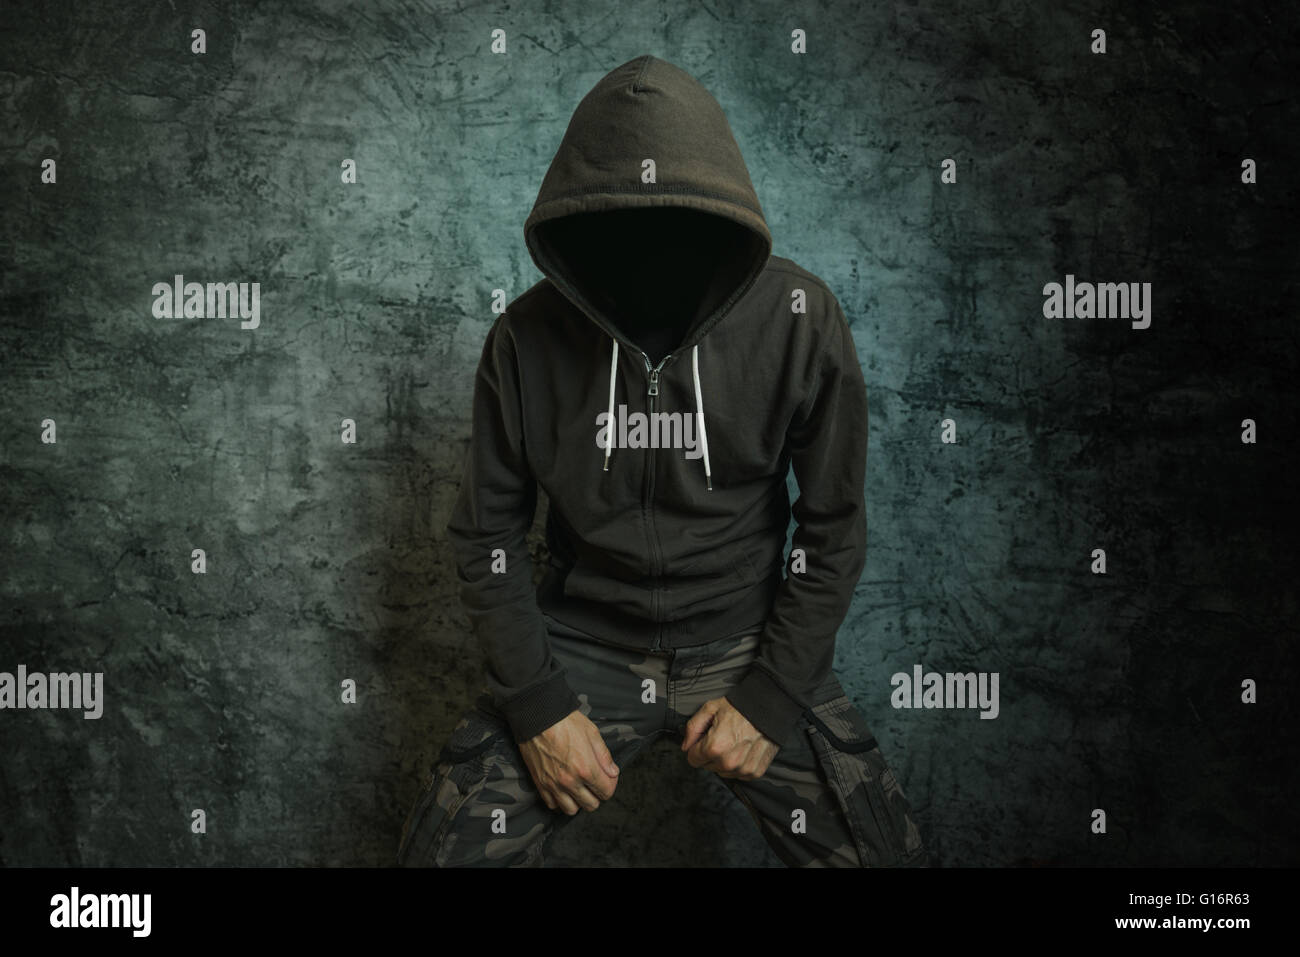 Spooky evil criminal person with hooded jacket in front of concrete wall. Stock Photo